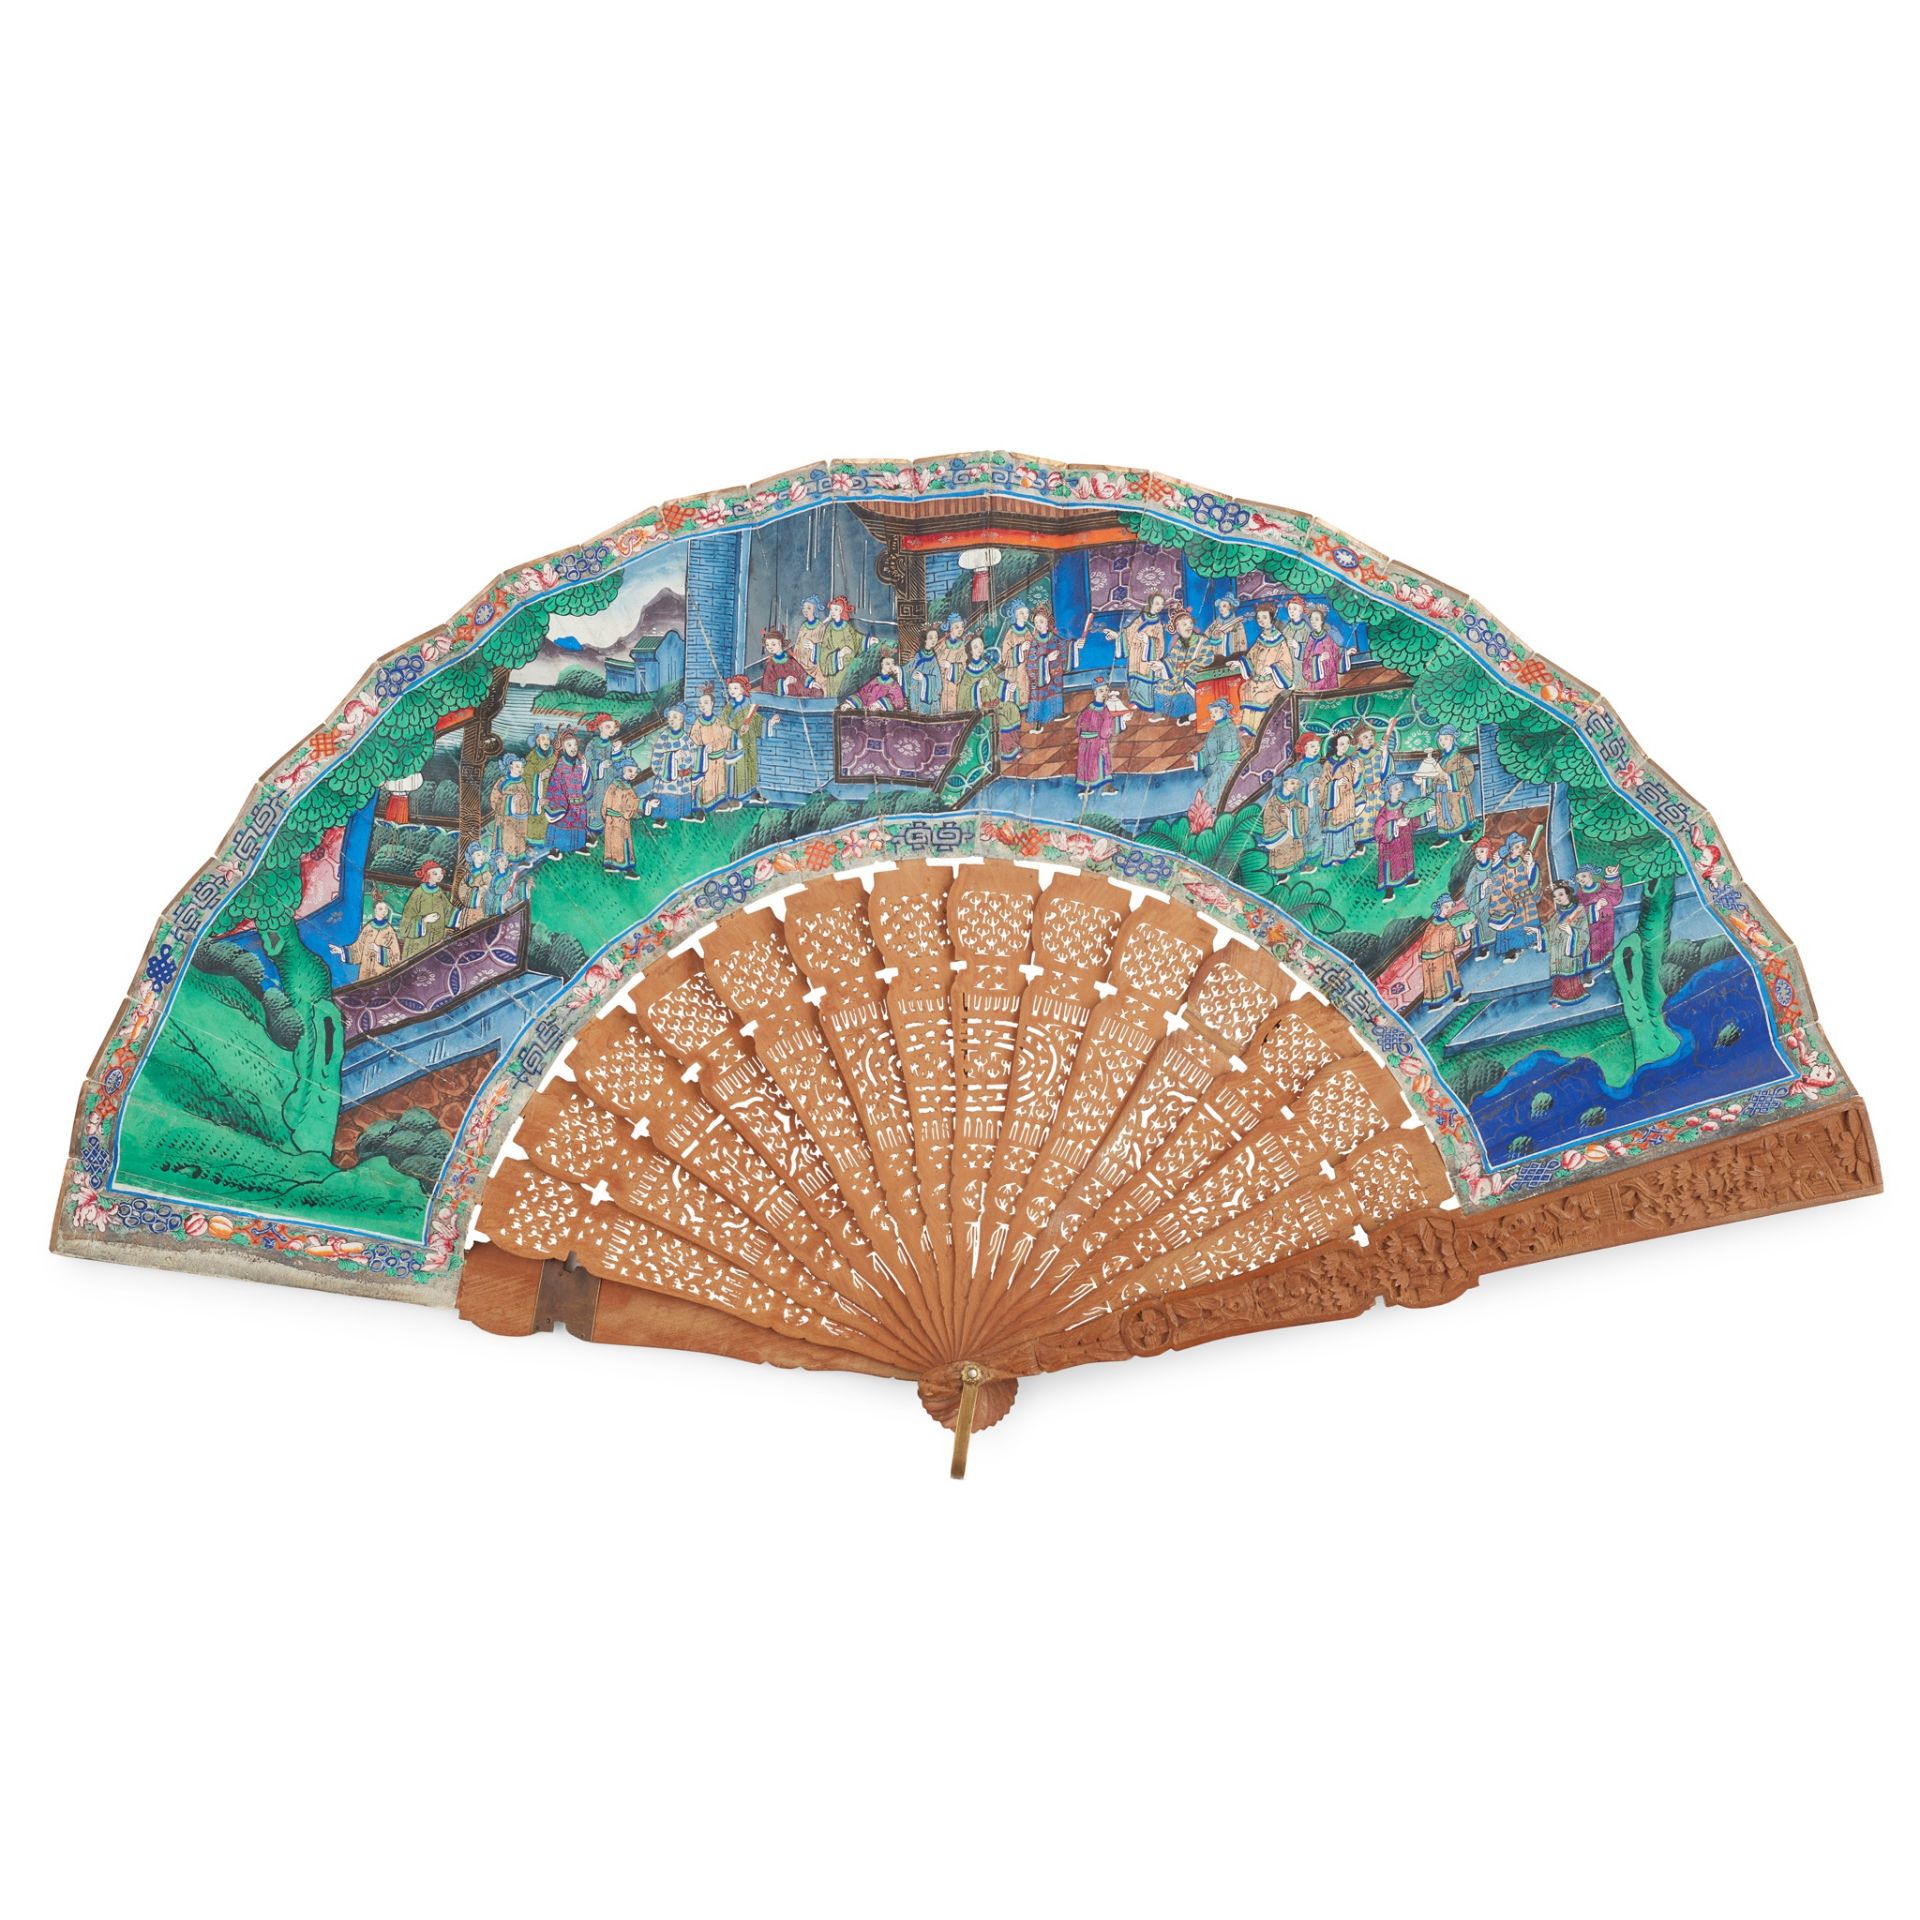 Y CANTON SANDALWOOD AND PAPER 'THOUSAND FACES' FAN QING DYNASTY, 19TH CENTURY